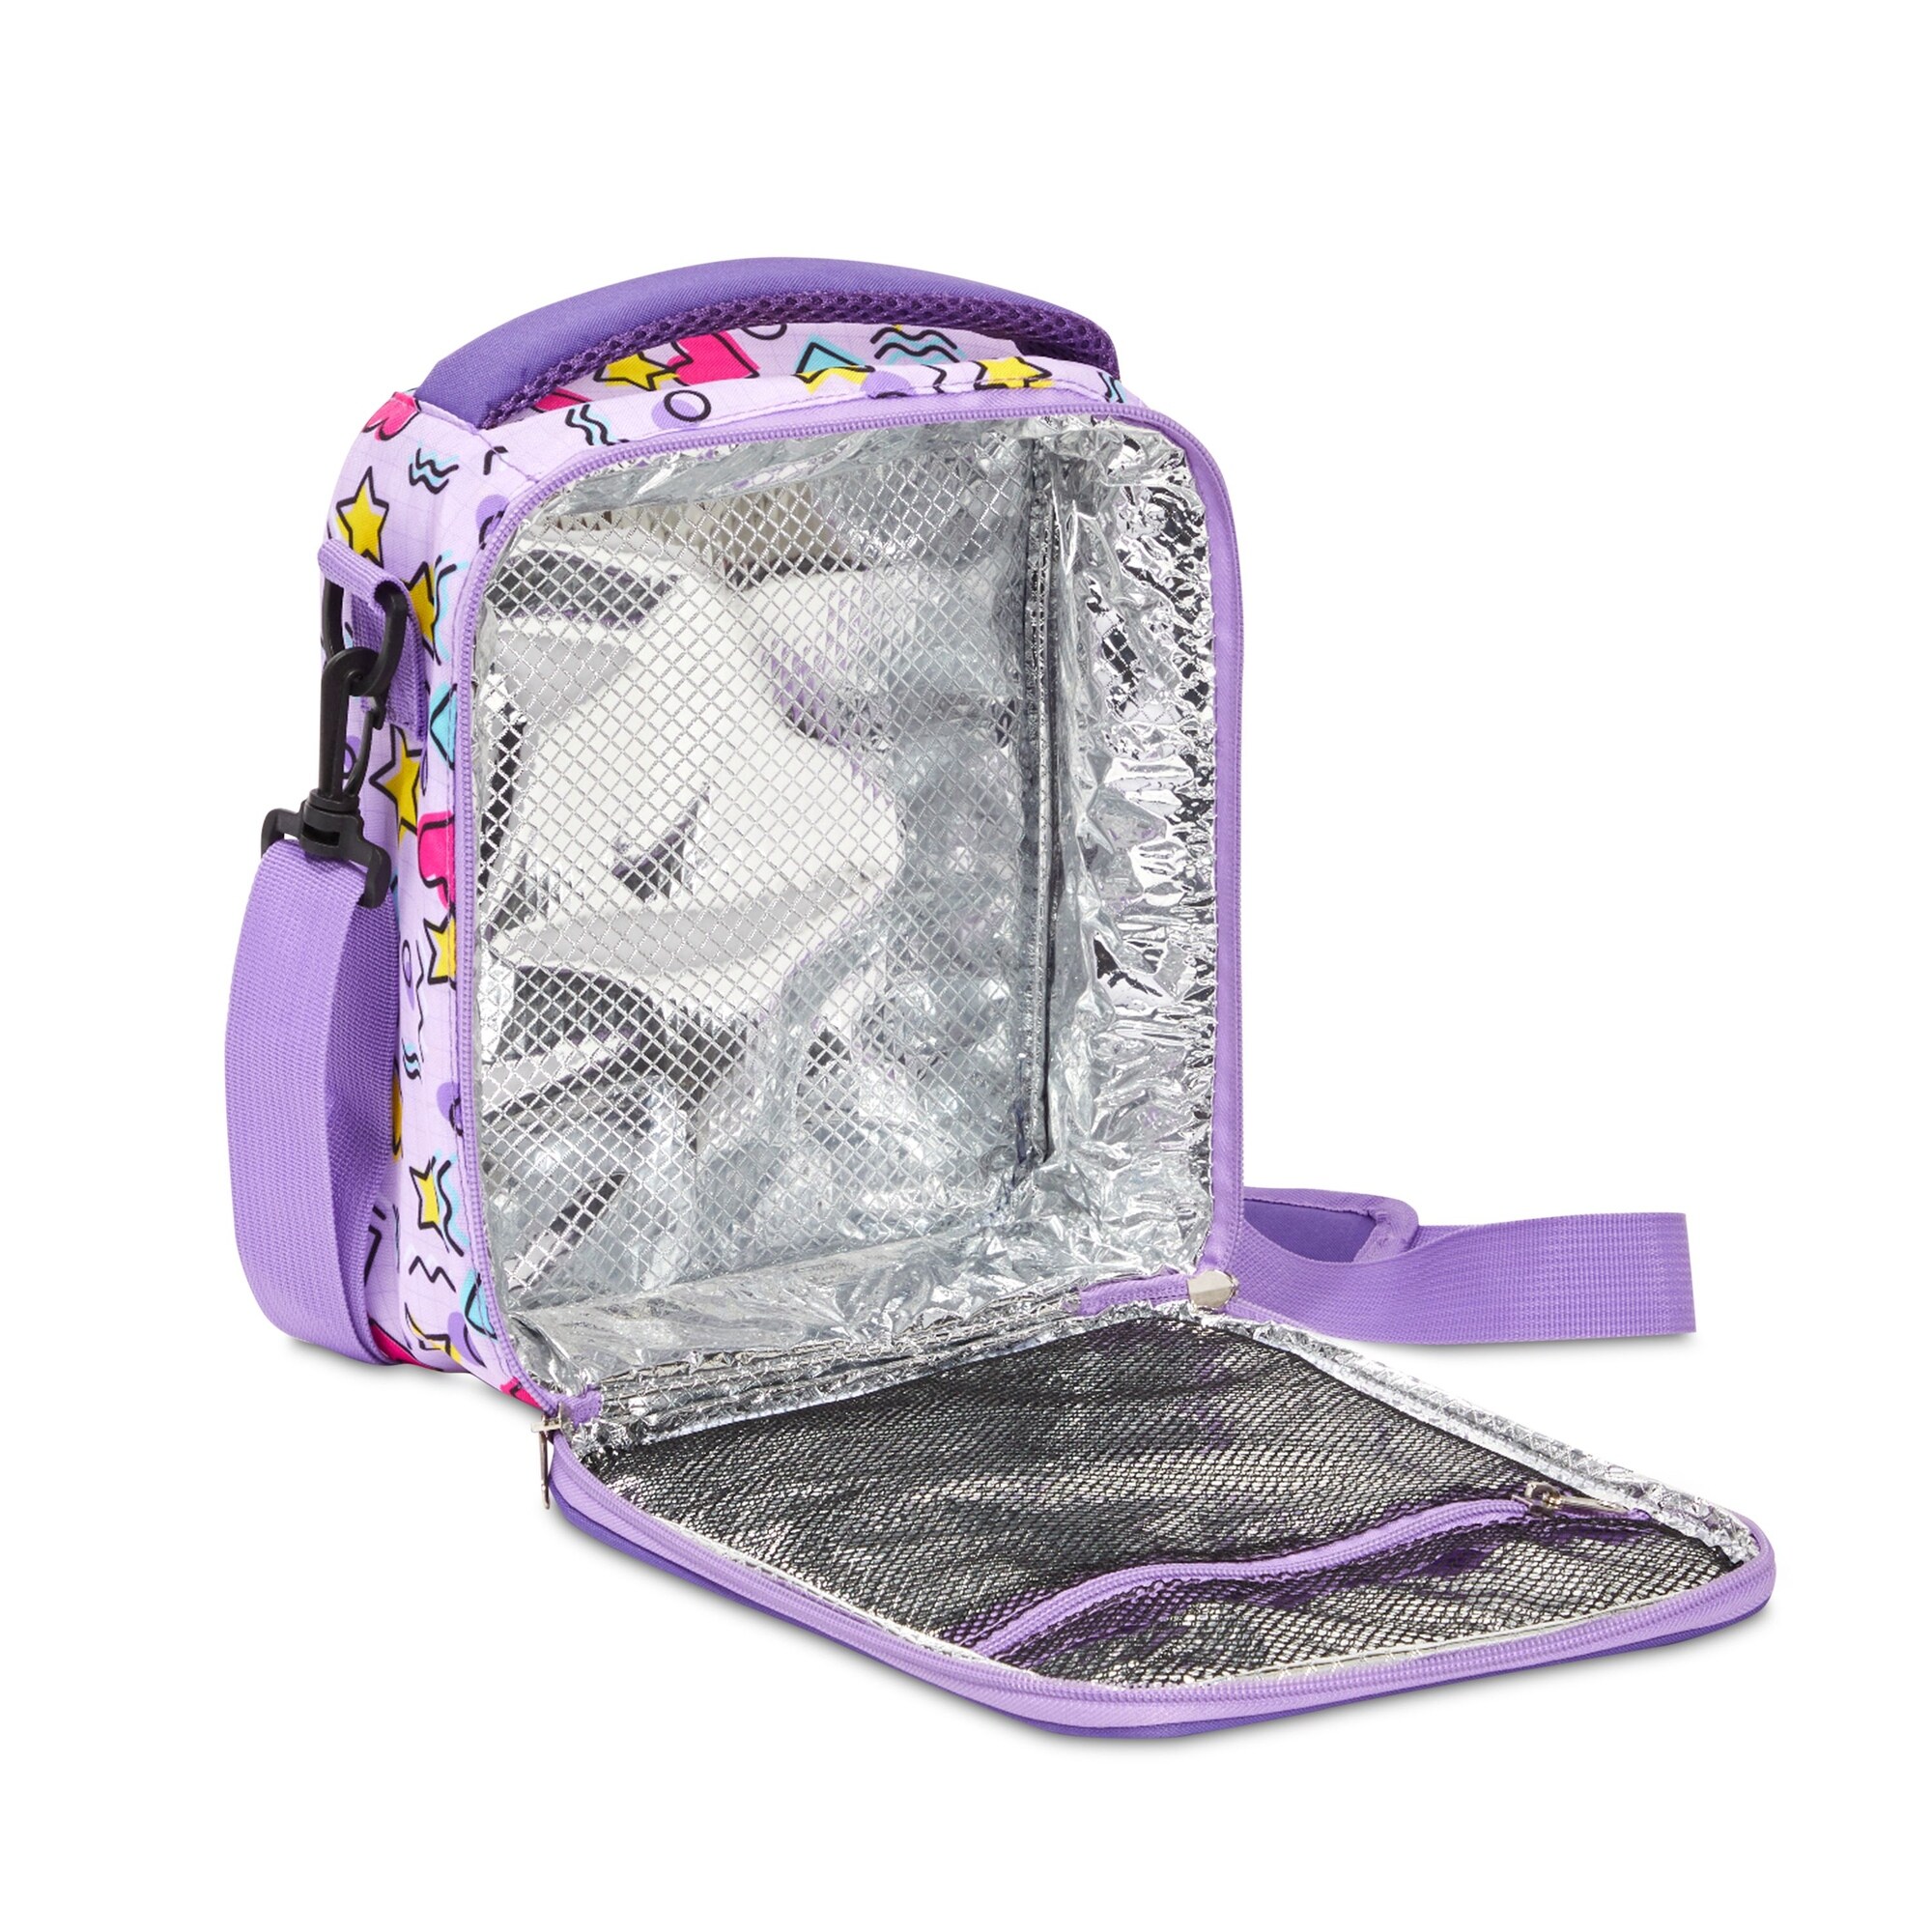 https://ak1.ostkcdn.com/images/products/is/images/direct/a225c859de7e0cde0c3dc156f4cdbed26f0f6456/Cute-Insulated-Lunch-Bag-for-Girls-and-Kids-%28Light-Purple%2C-8-x-10-x-4-In%29.jpg